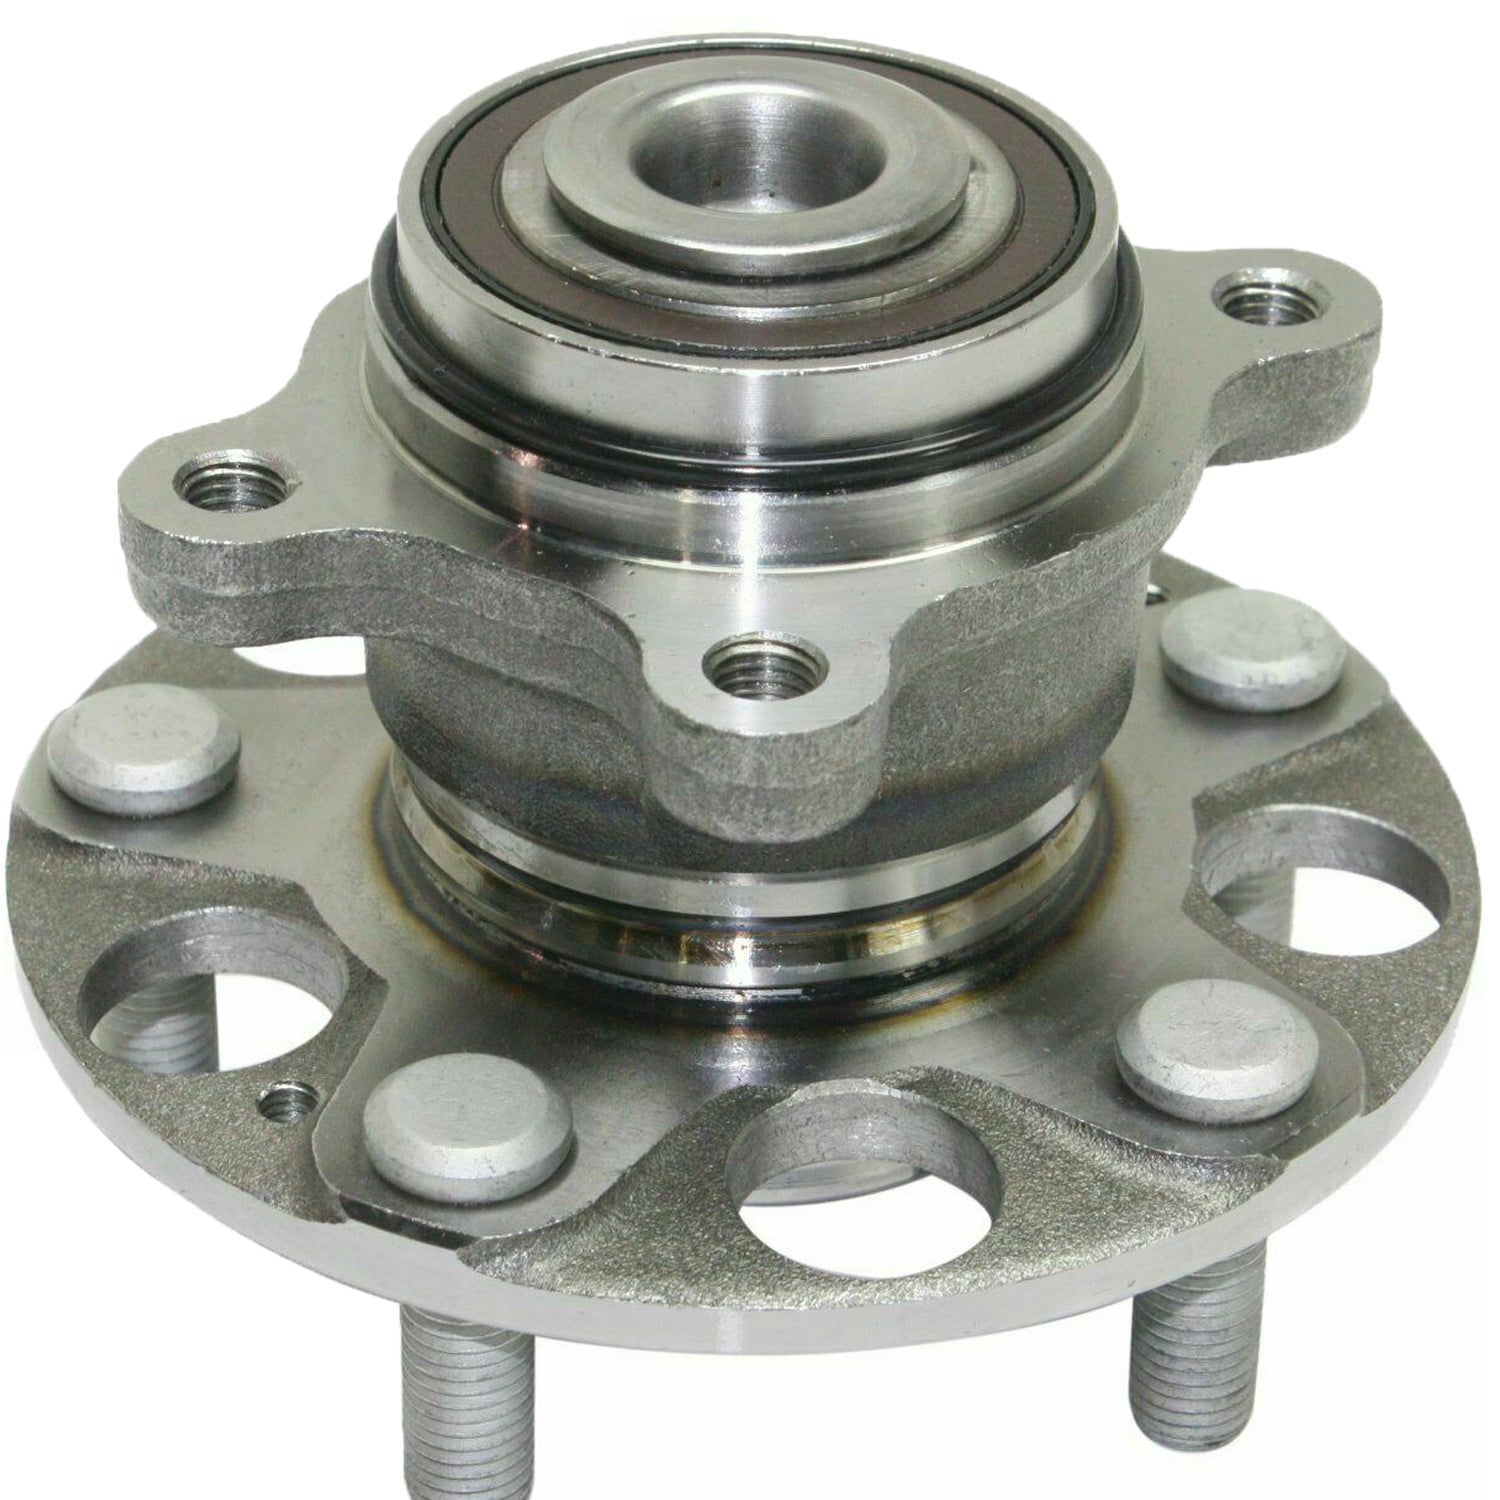 MotorbyMotor 512257 Rear Heavy Duty Wheel Bearing and Hub Assembly with 5 Lugs, 2006-2011 Honda Civic (LX DX Models ONLY)  (w/ABS) MotorbyMotor